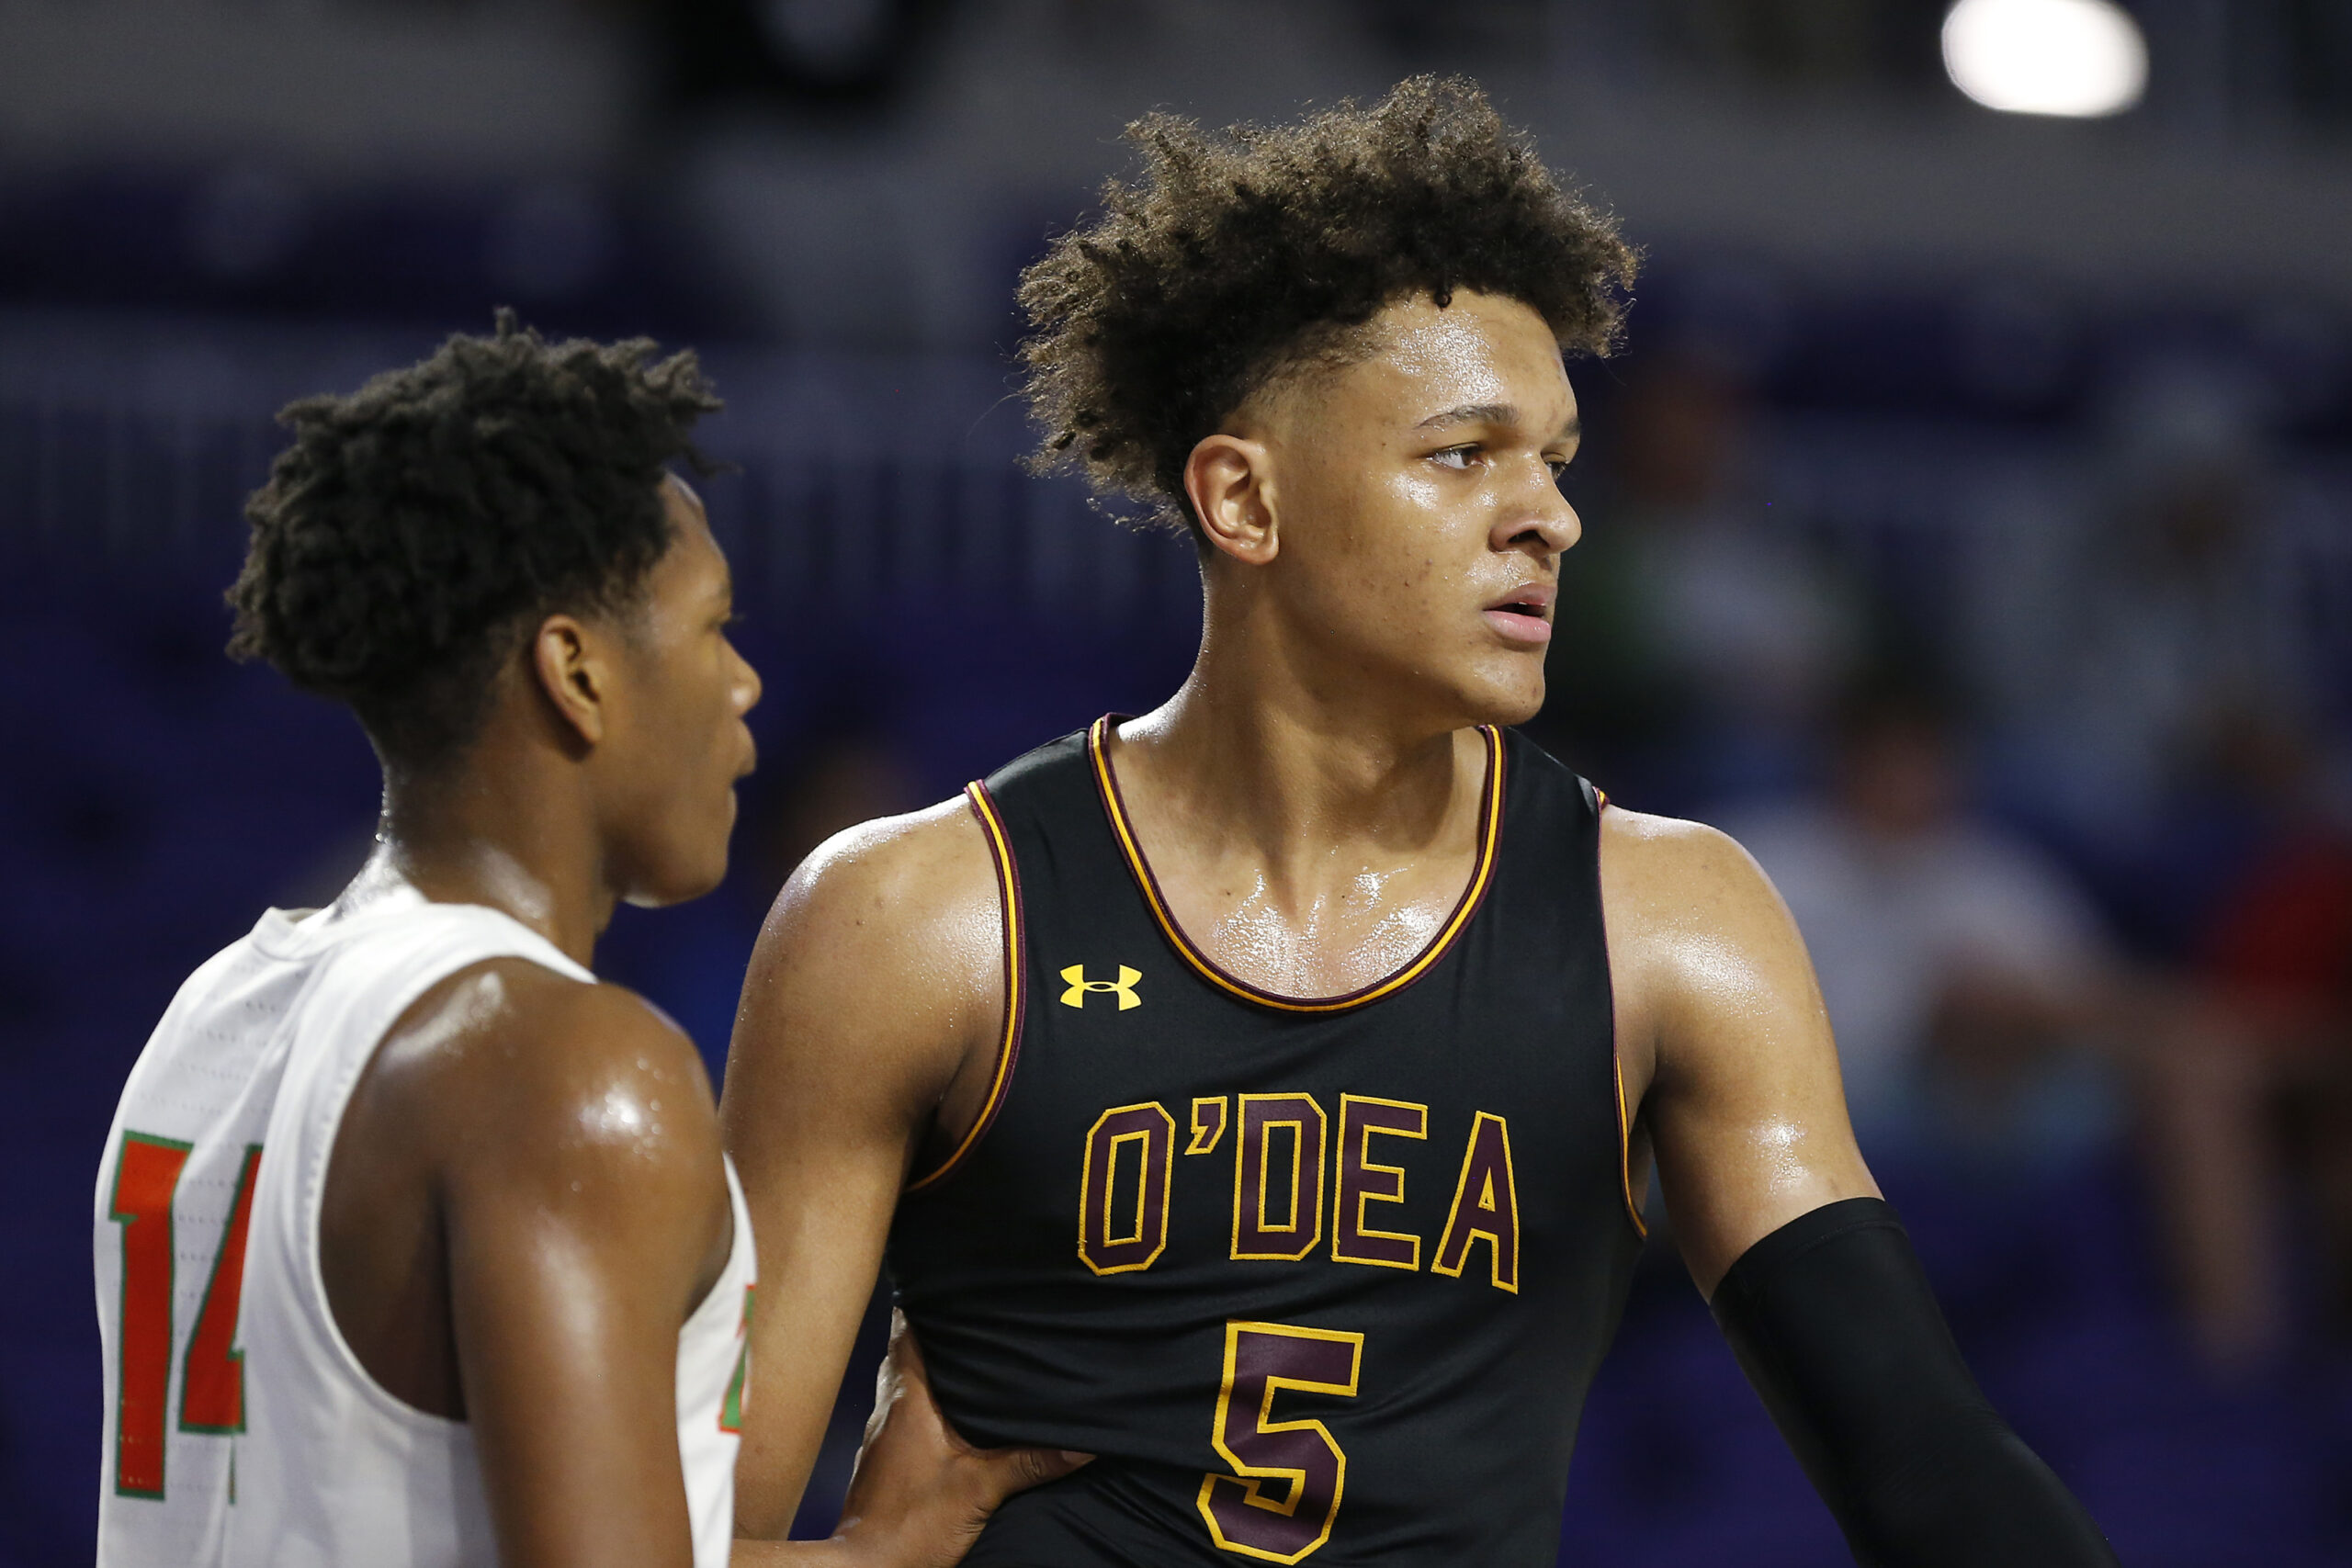 Paolo Banchero overtakes Chet Holmgren as projected No. 1 overall pick in  ESPN's latest 2022 NBA Mock Draft